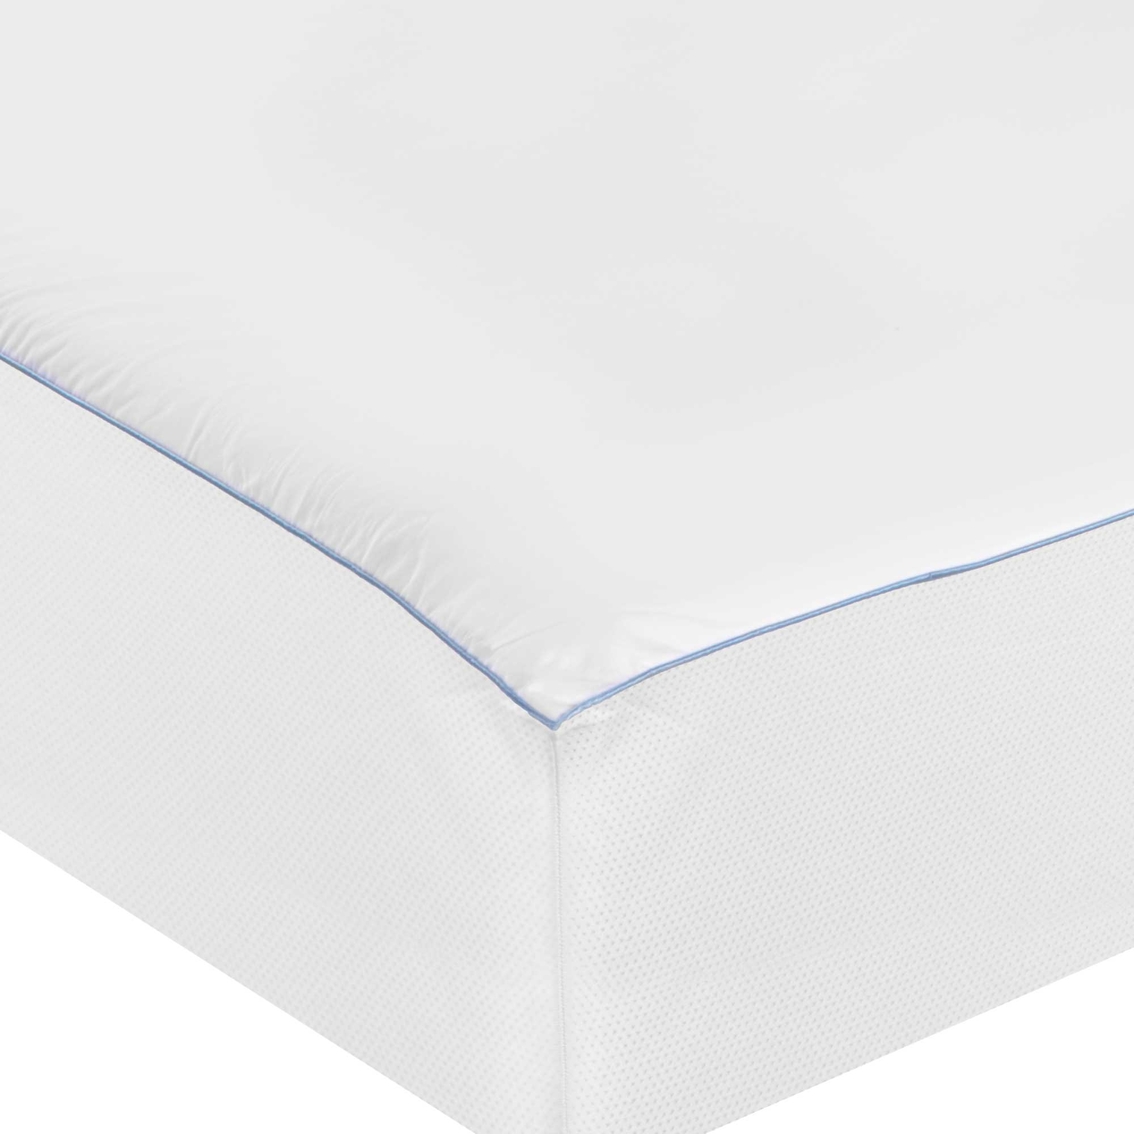 Sealy Cool Comfort Mattress Protector - Image 4 of 4